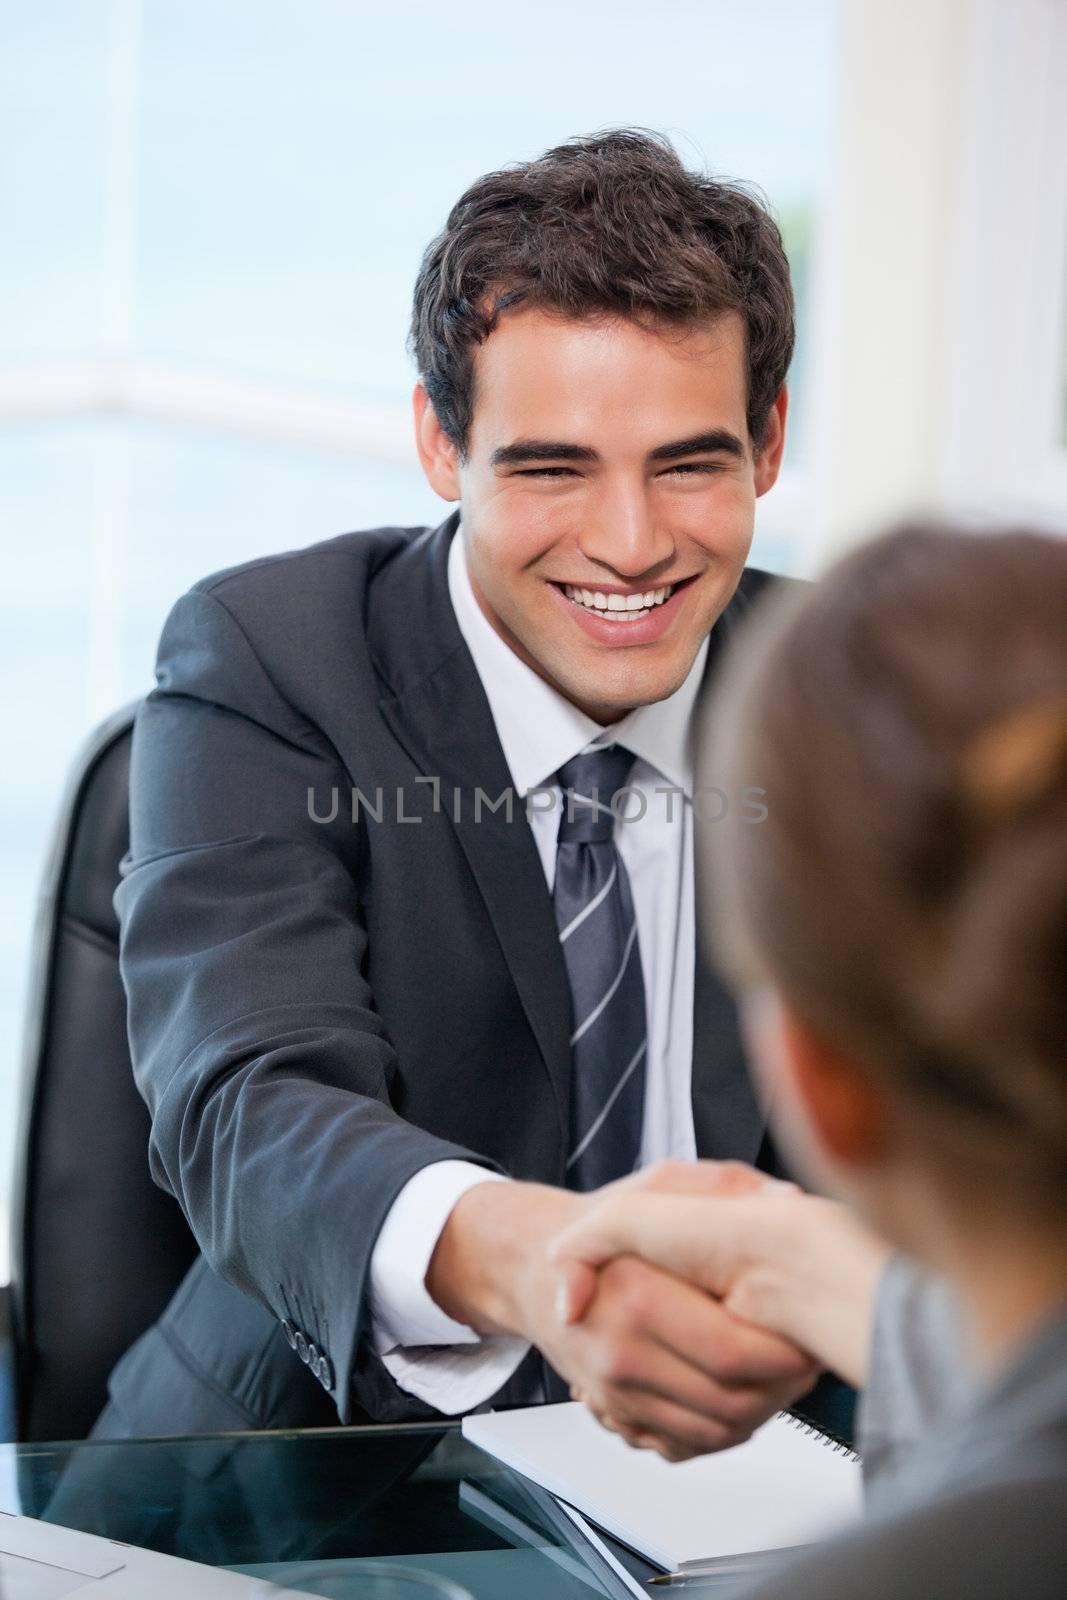 Businessman shaking hands with a client while smiling by Wavebreakmedia